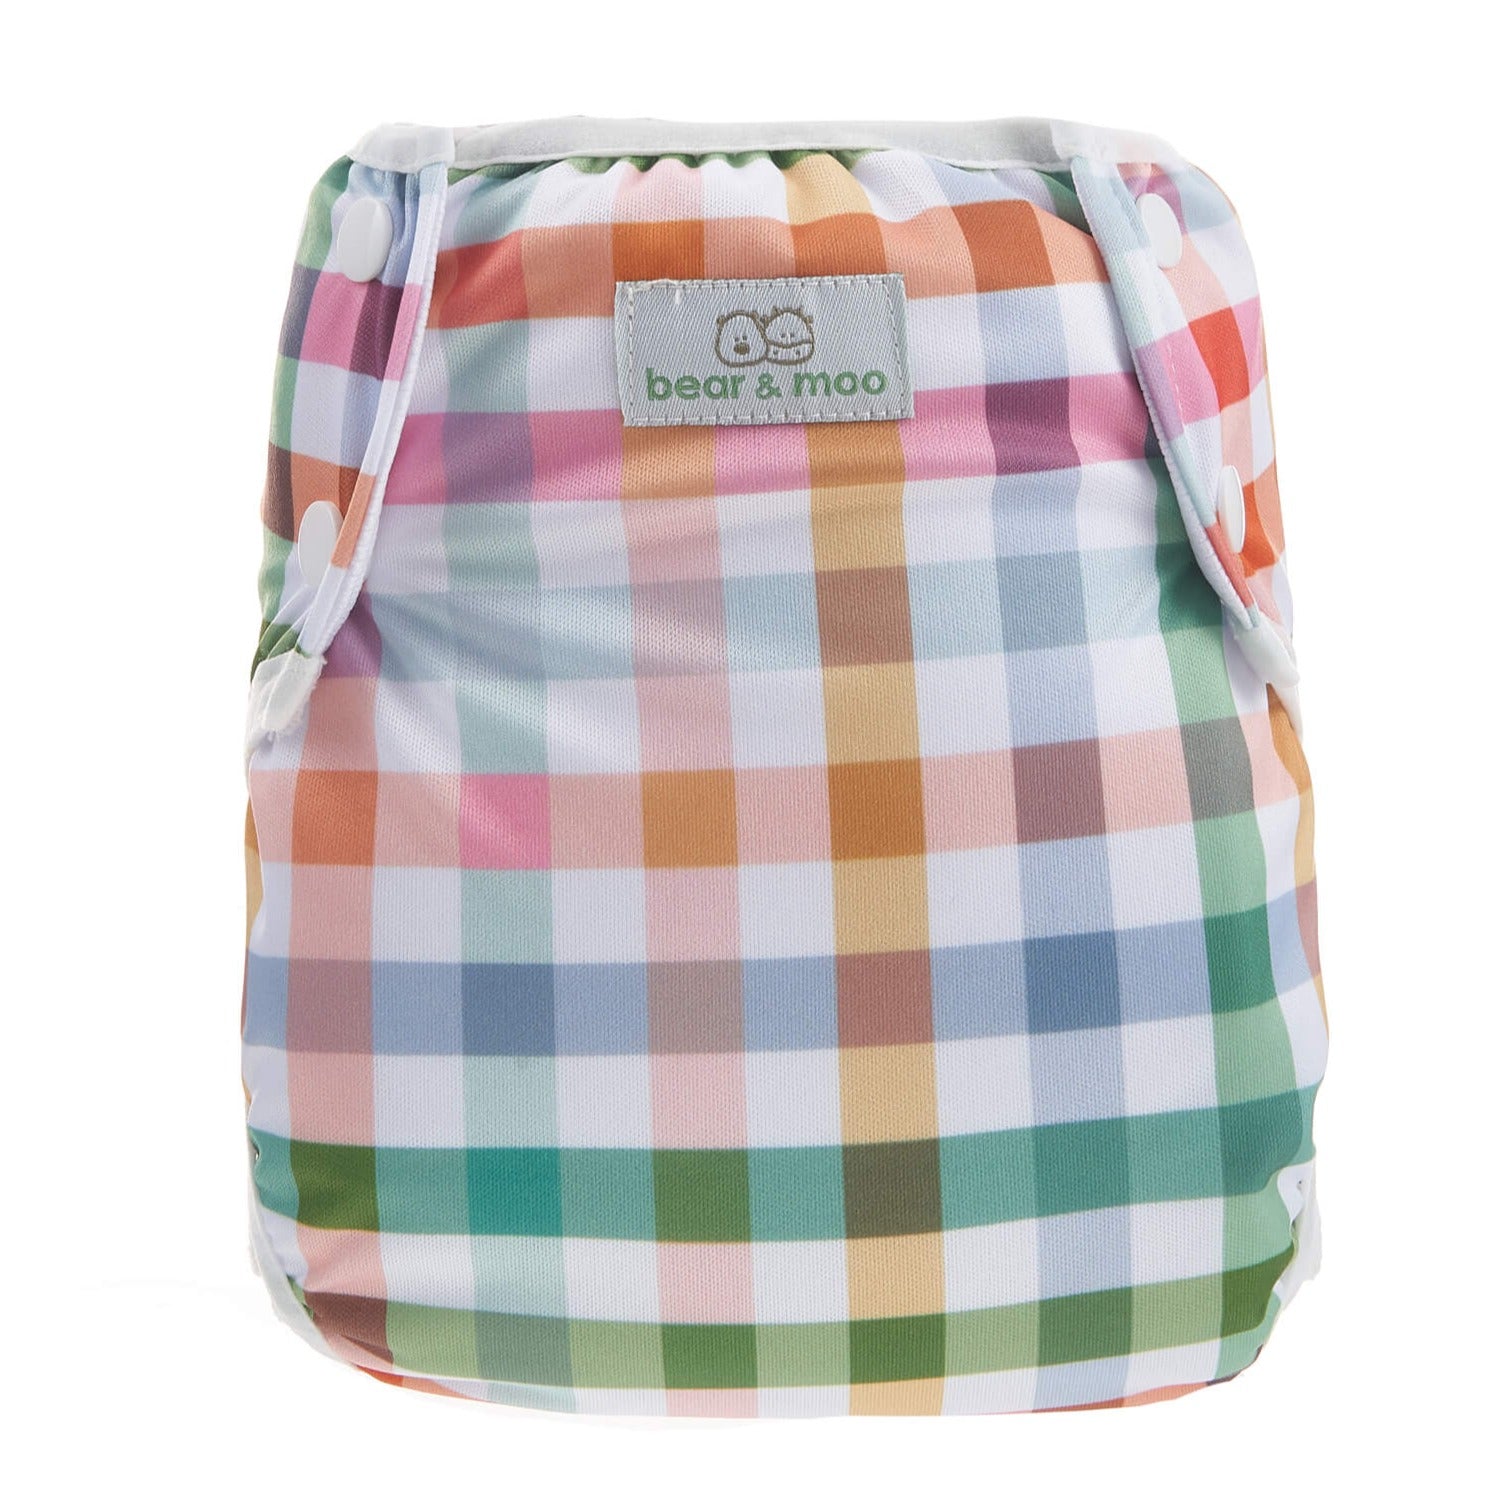 Picnic Gingham Reusable Swim Nappy from Bear & Moo